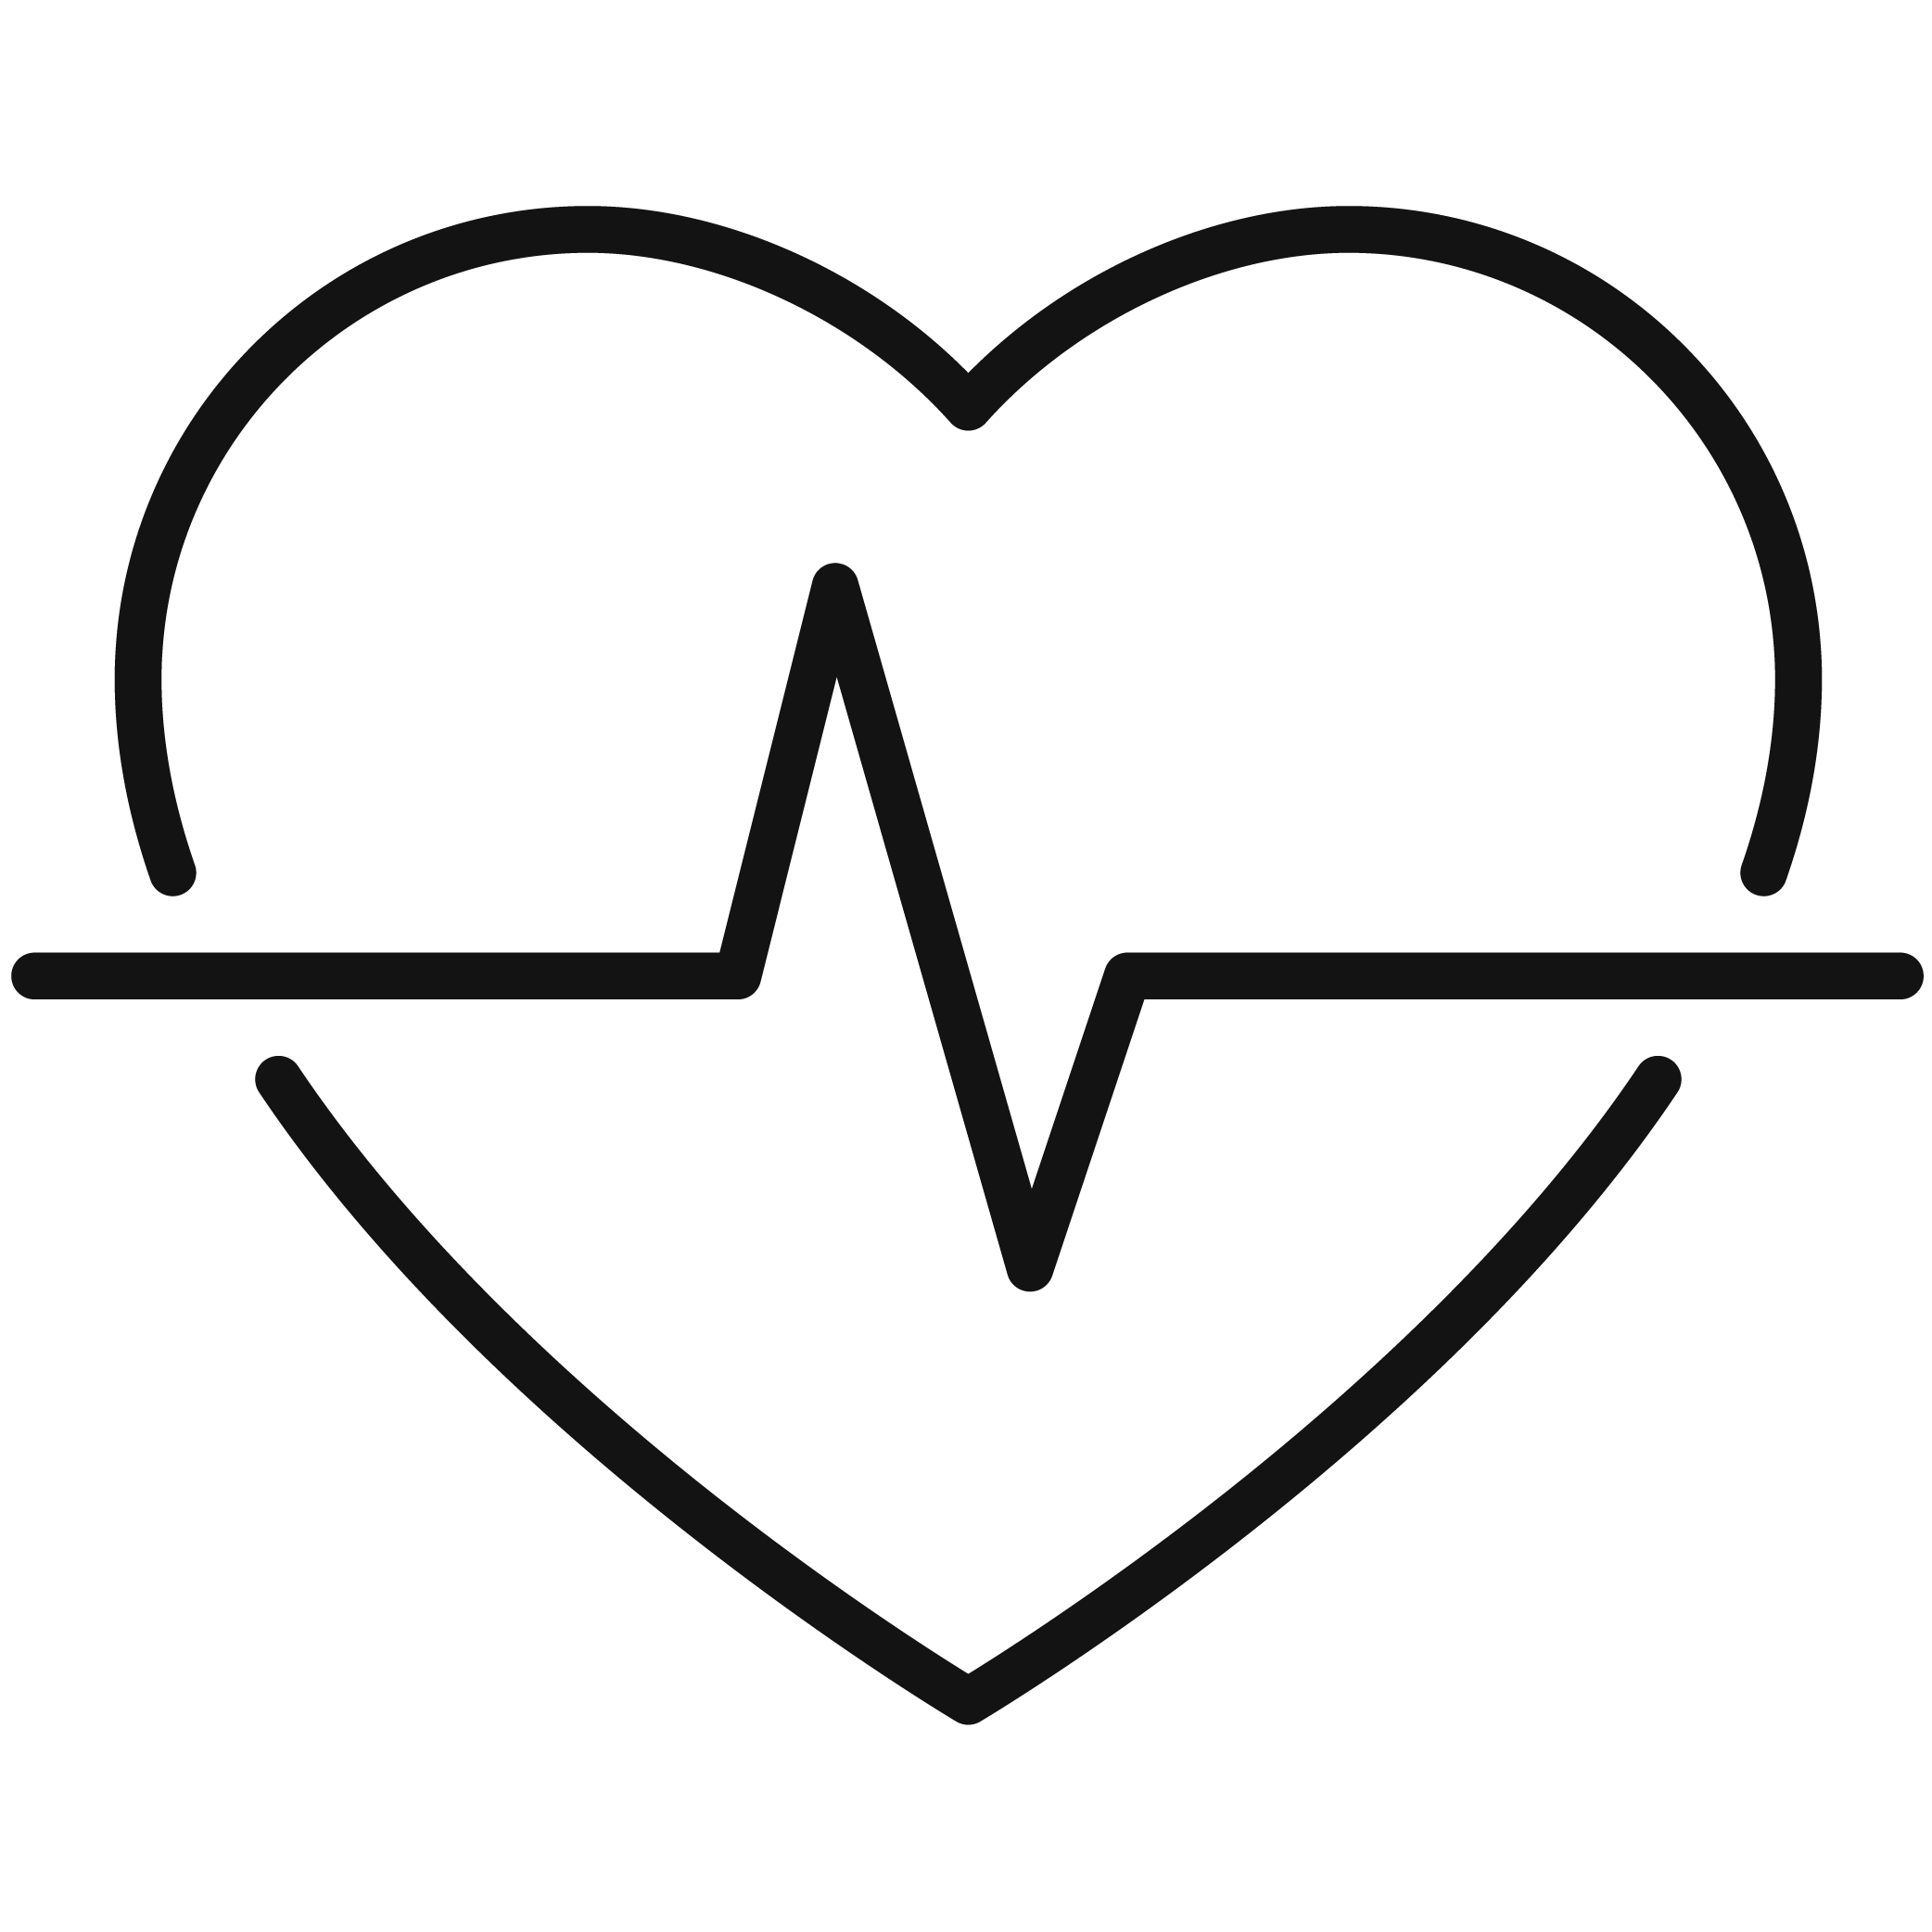 Heart rate icon, black